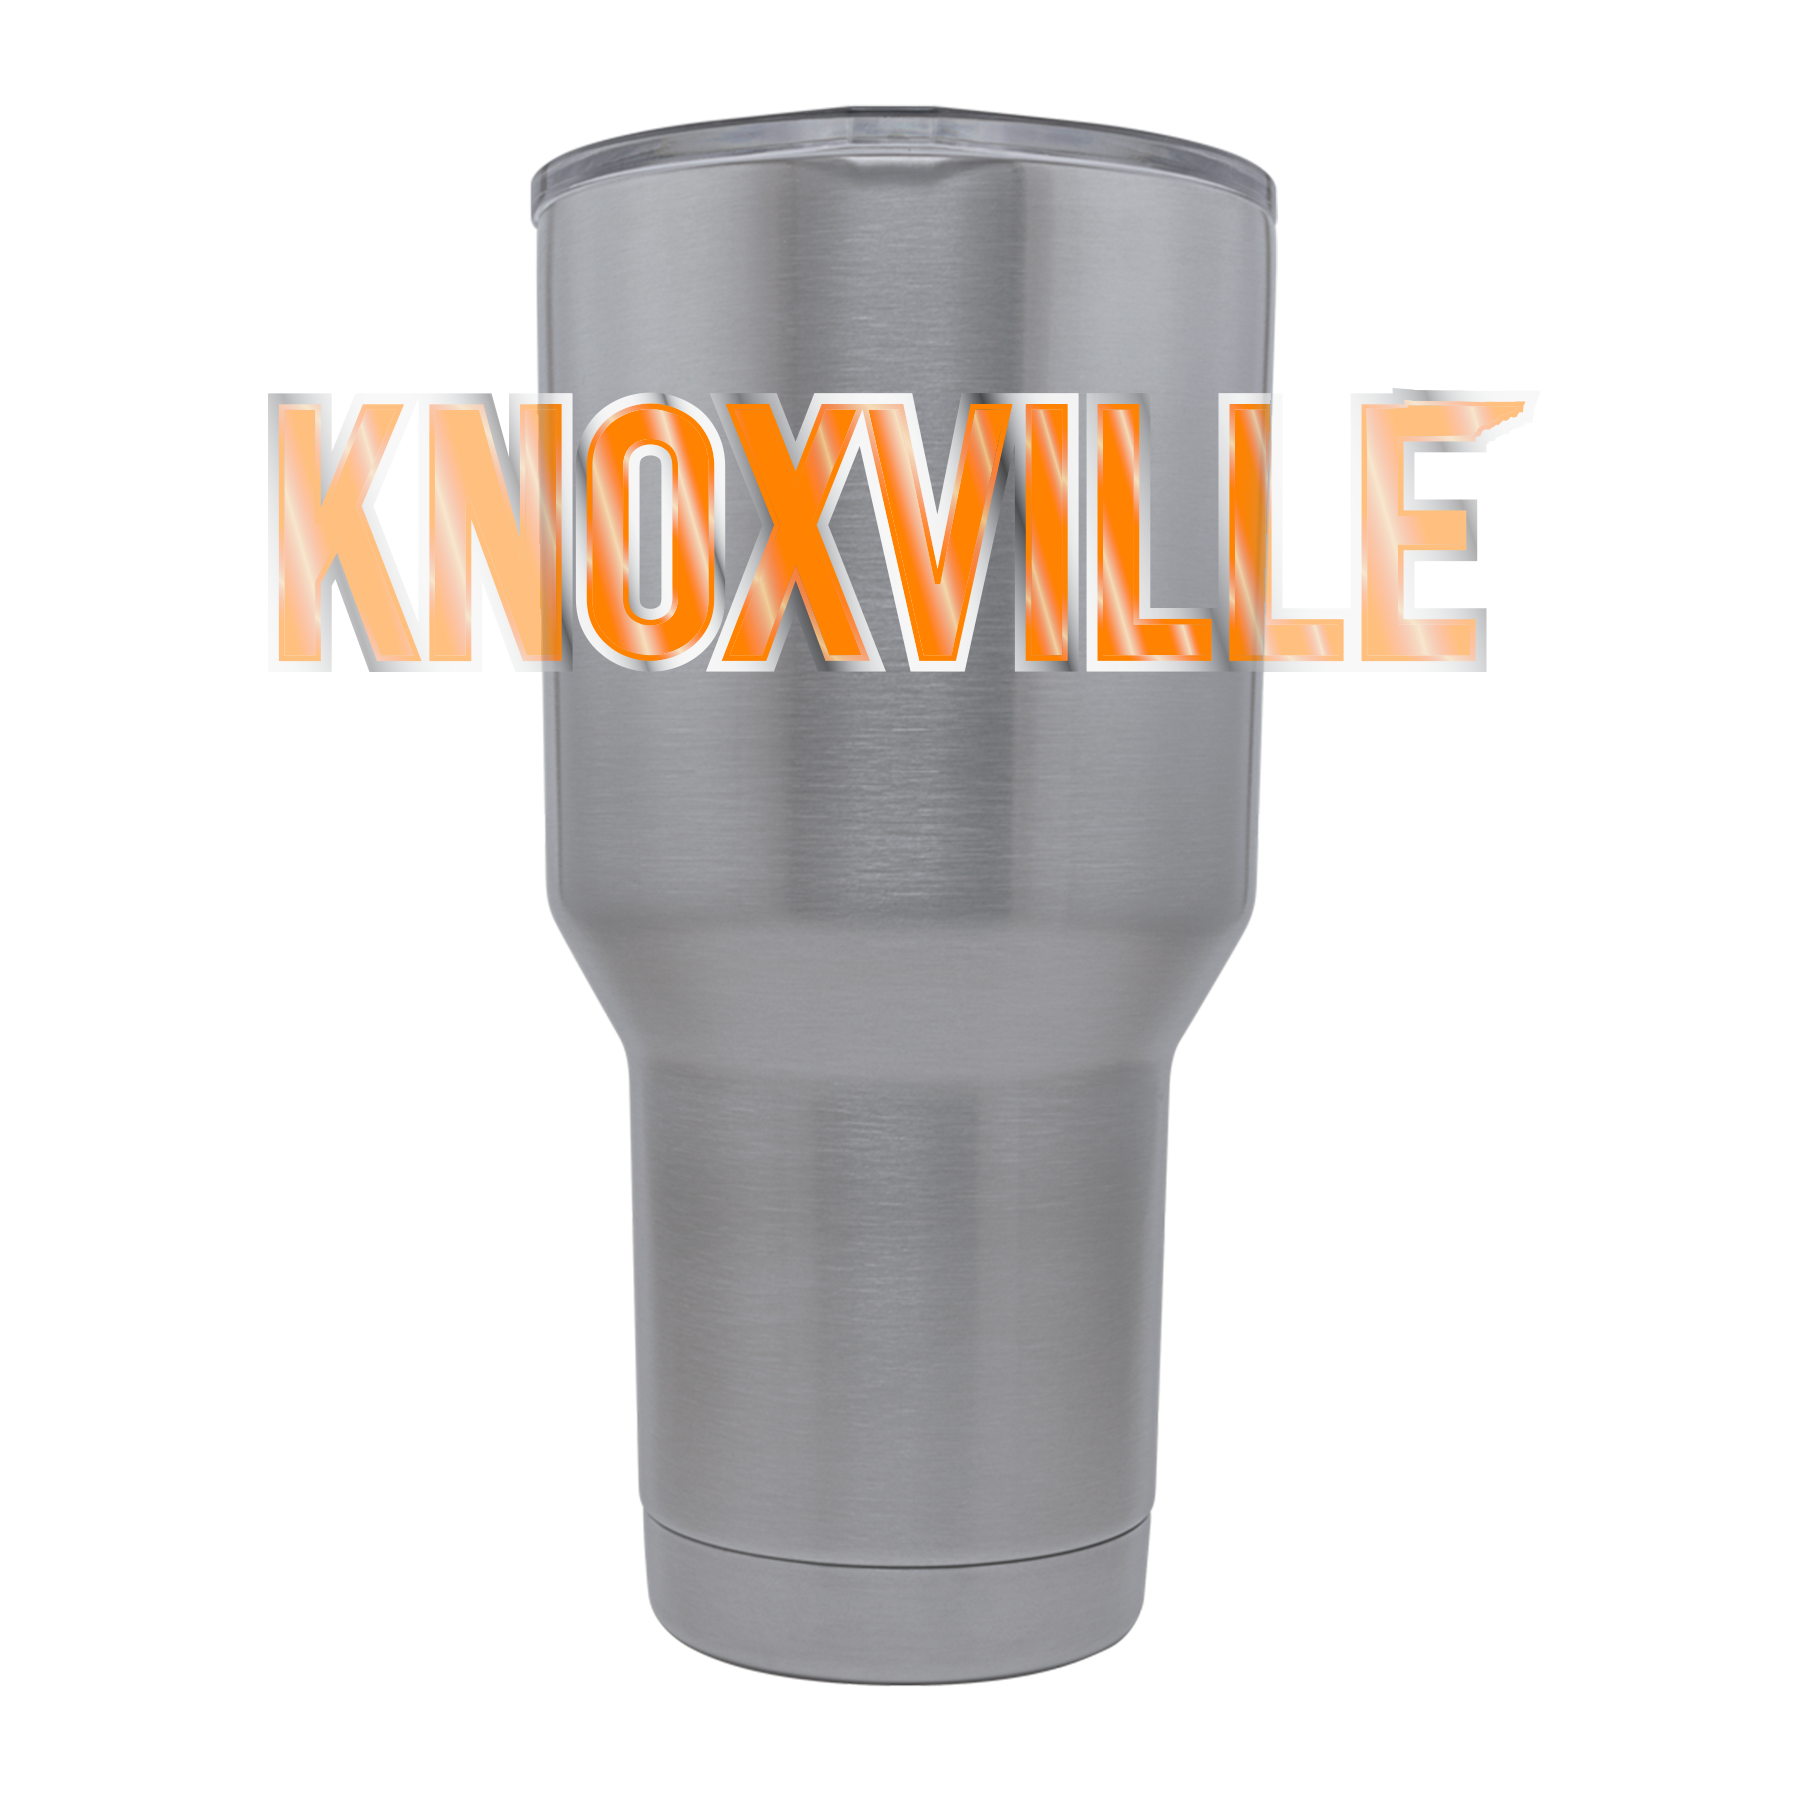 Tennessee 30oz City Tumbler - Knoxville